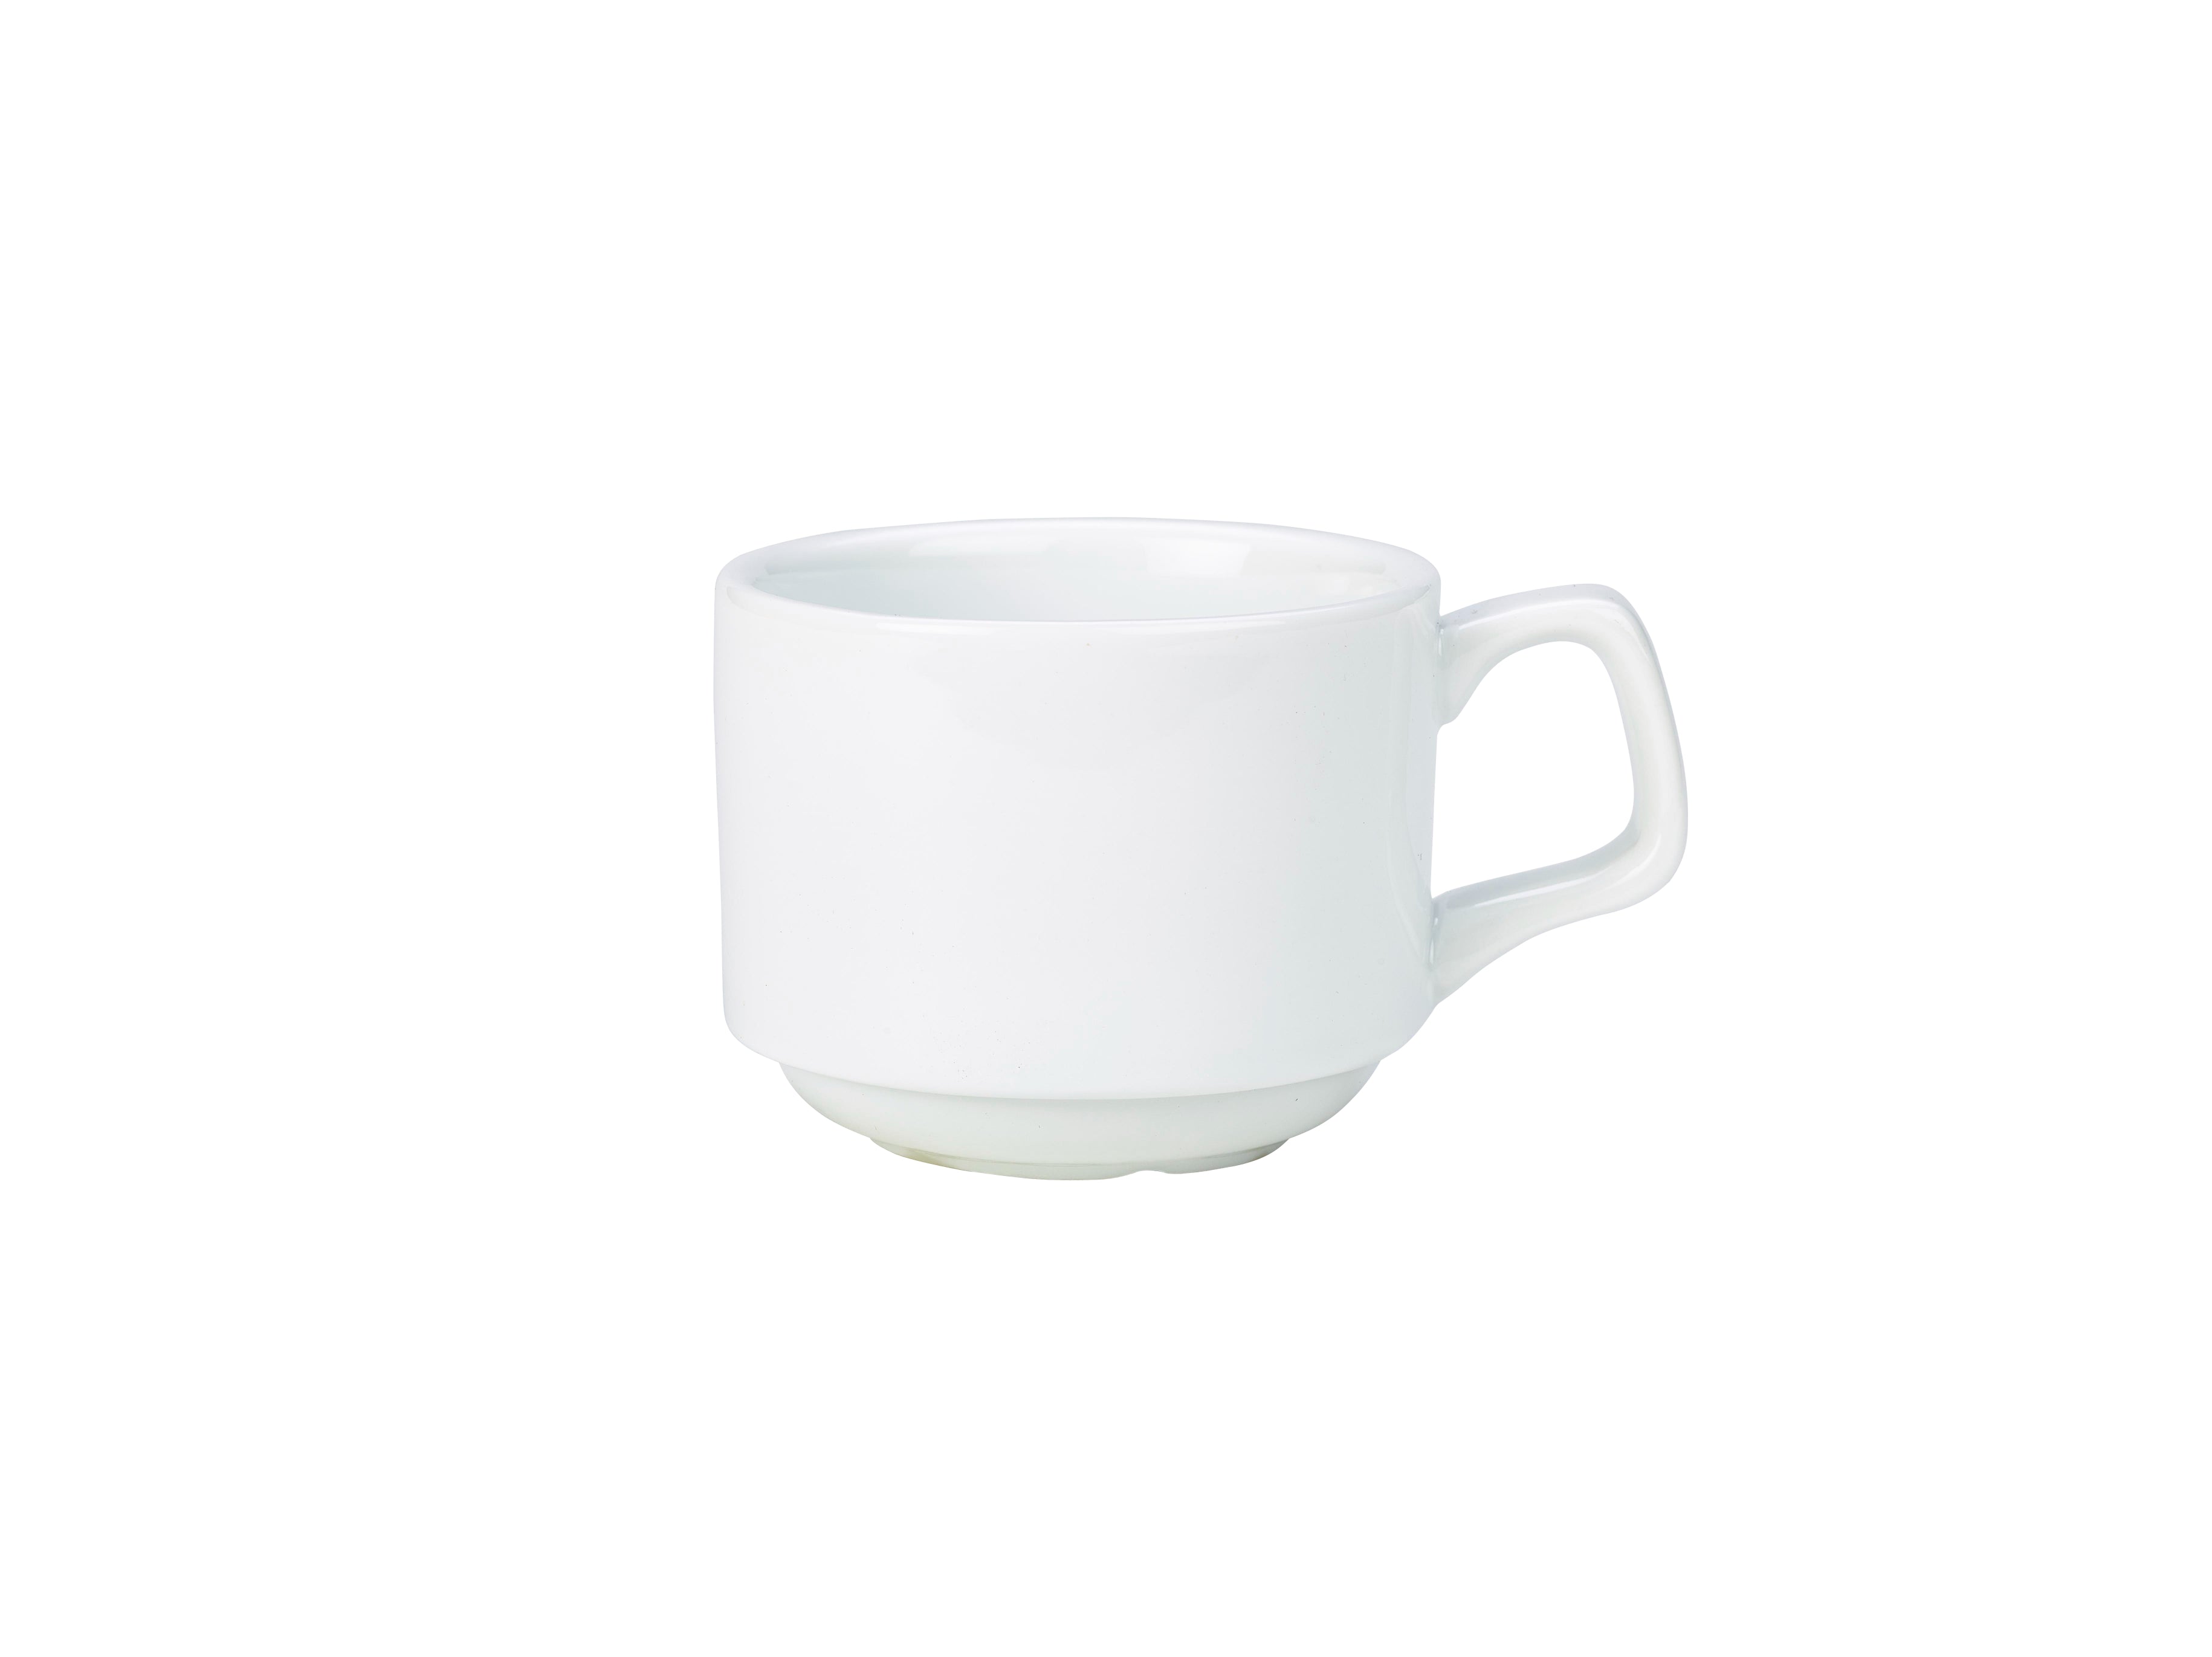 Genware Porcelain Stacking Cup 20cl/7oz